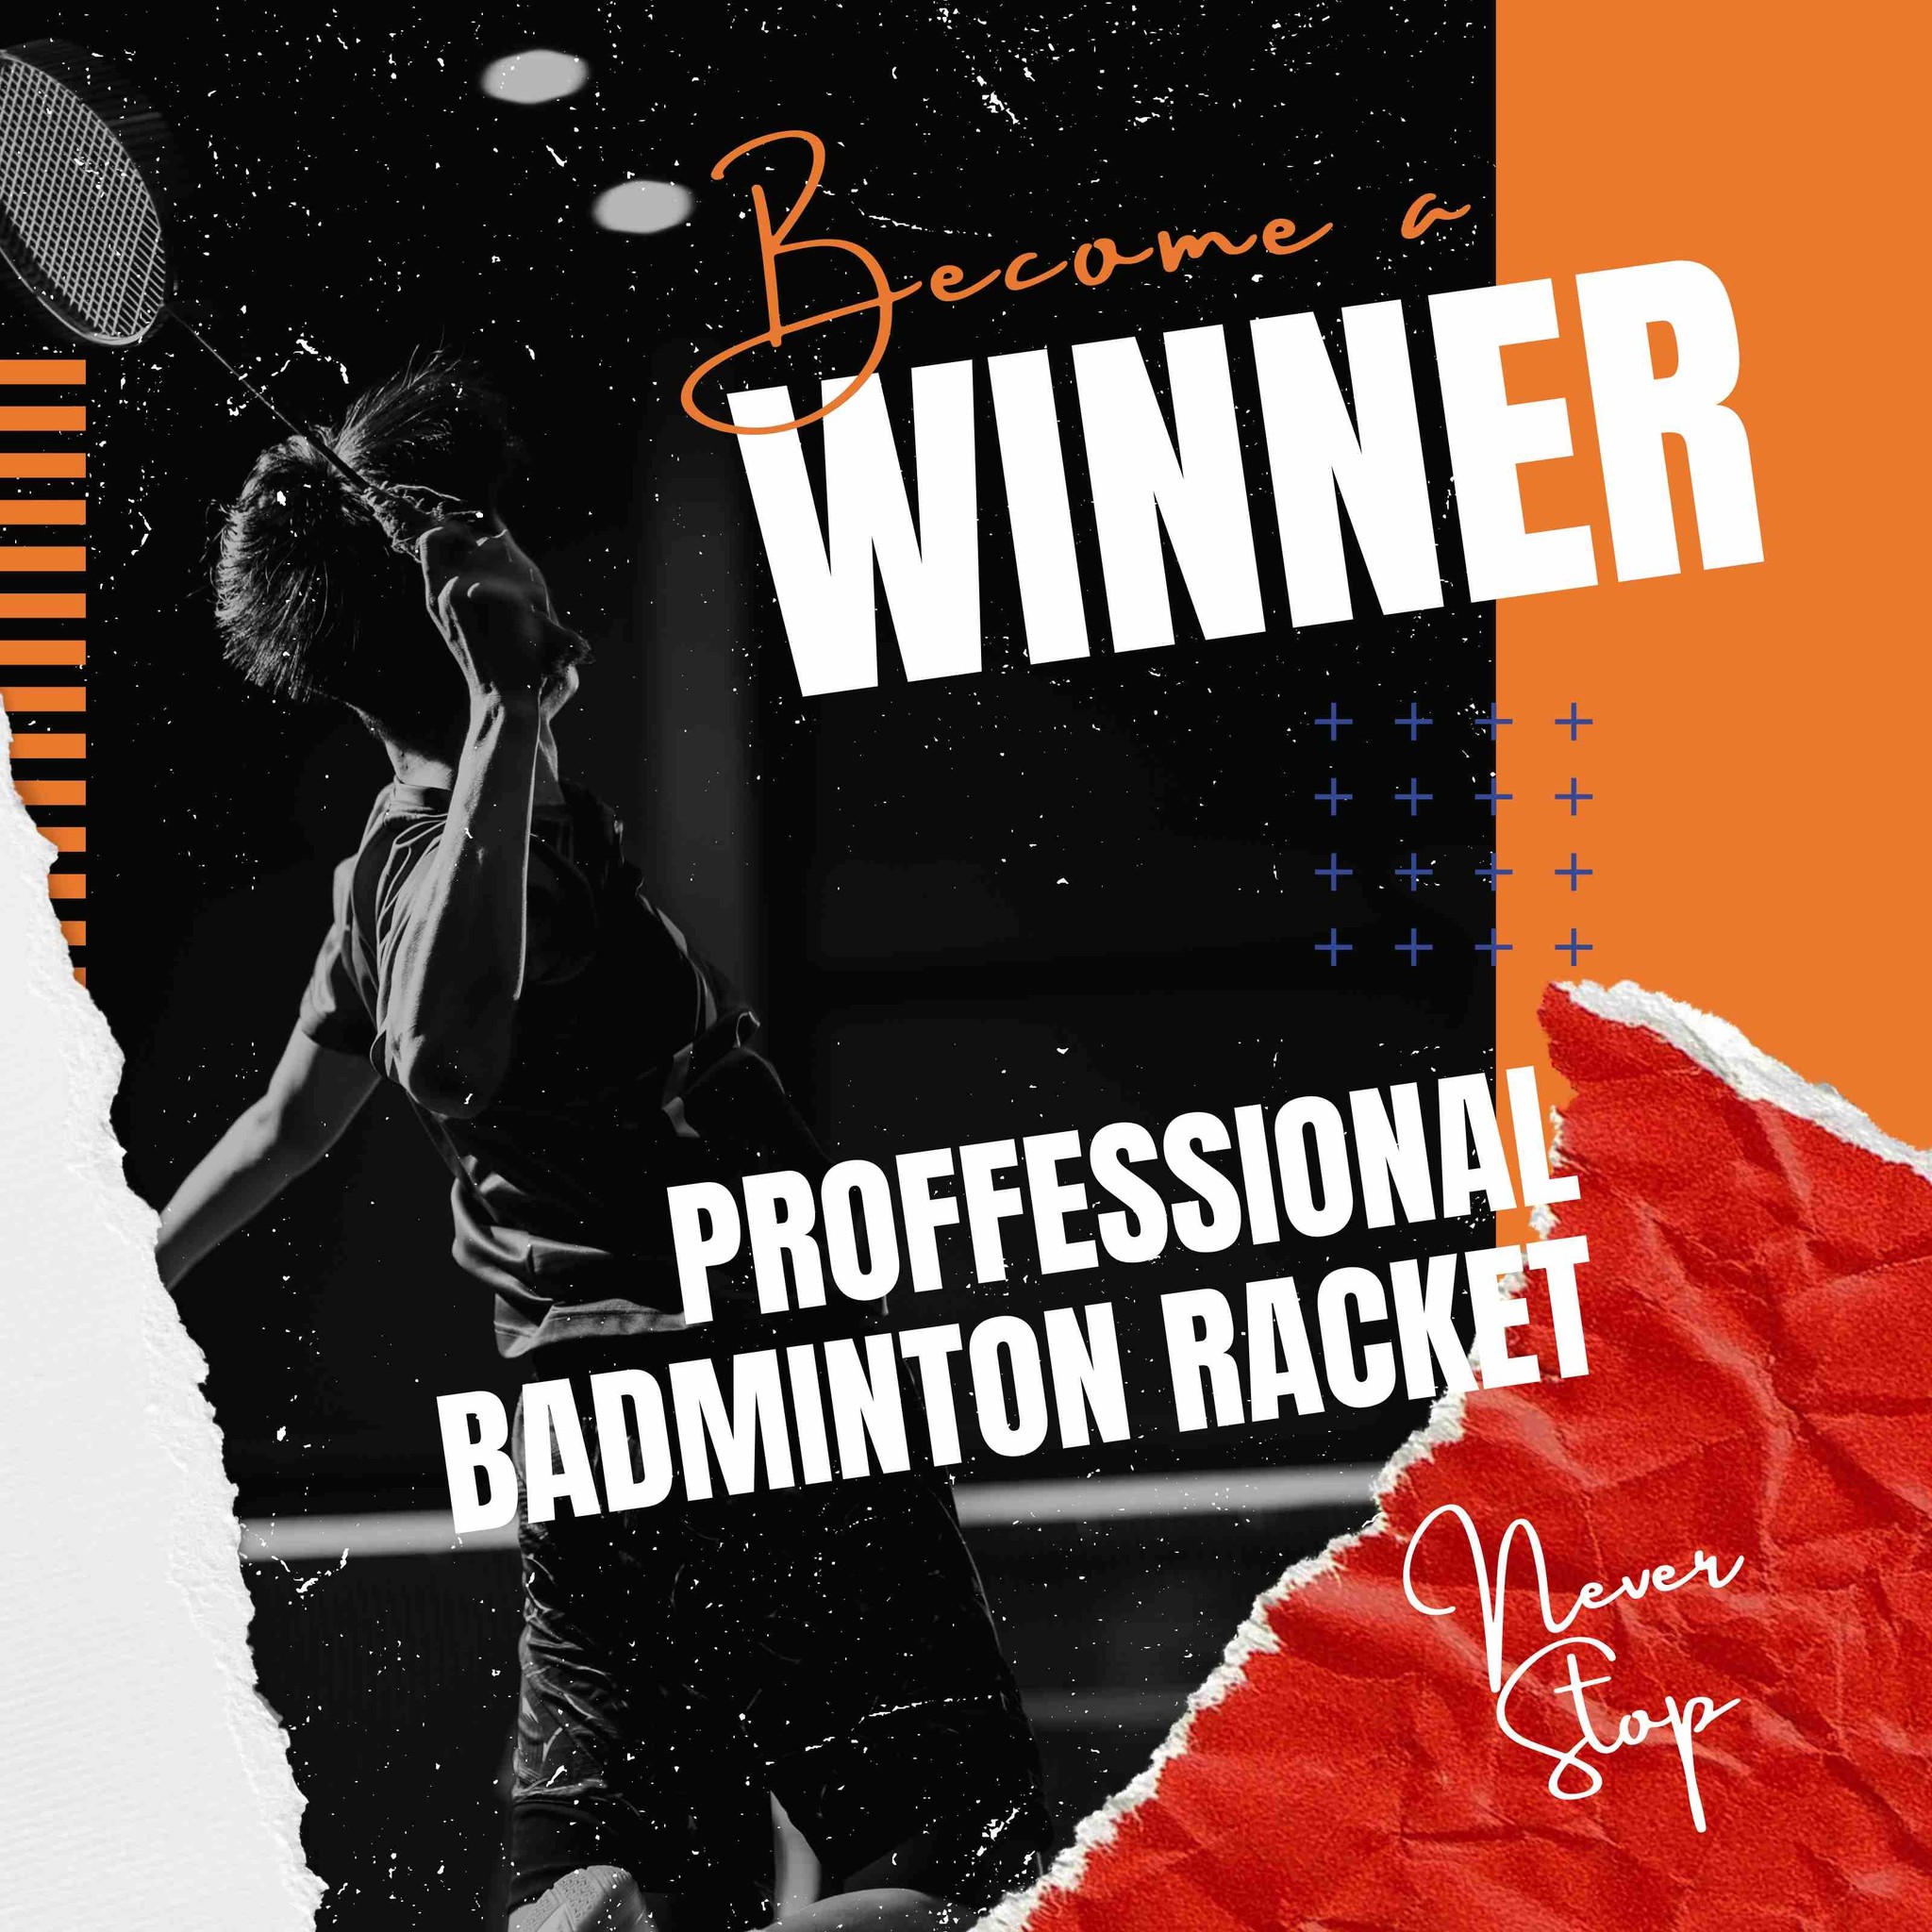 Badminton rackets used by the professionals!